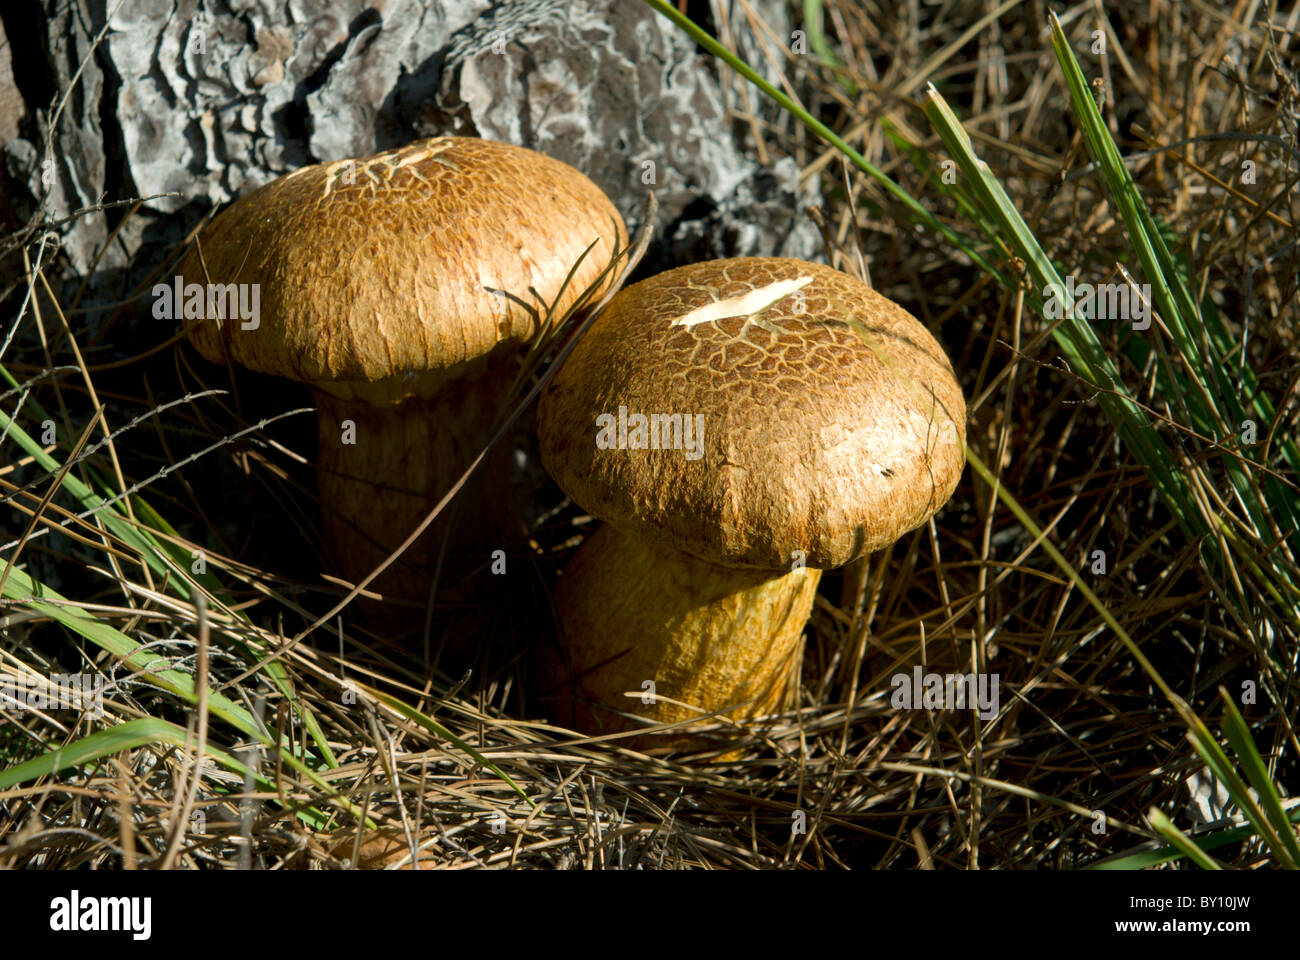 Fungus growing in the shelter of a conifer on the woodland edge Stock Photo